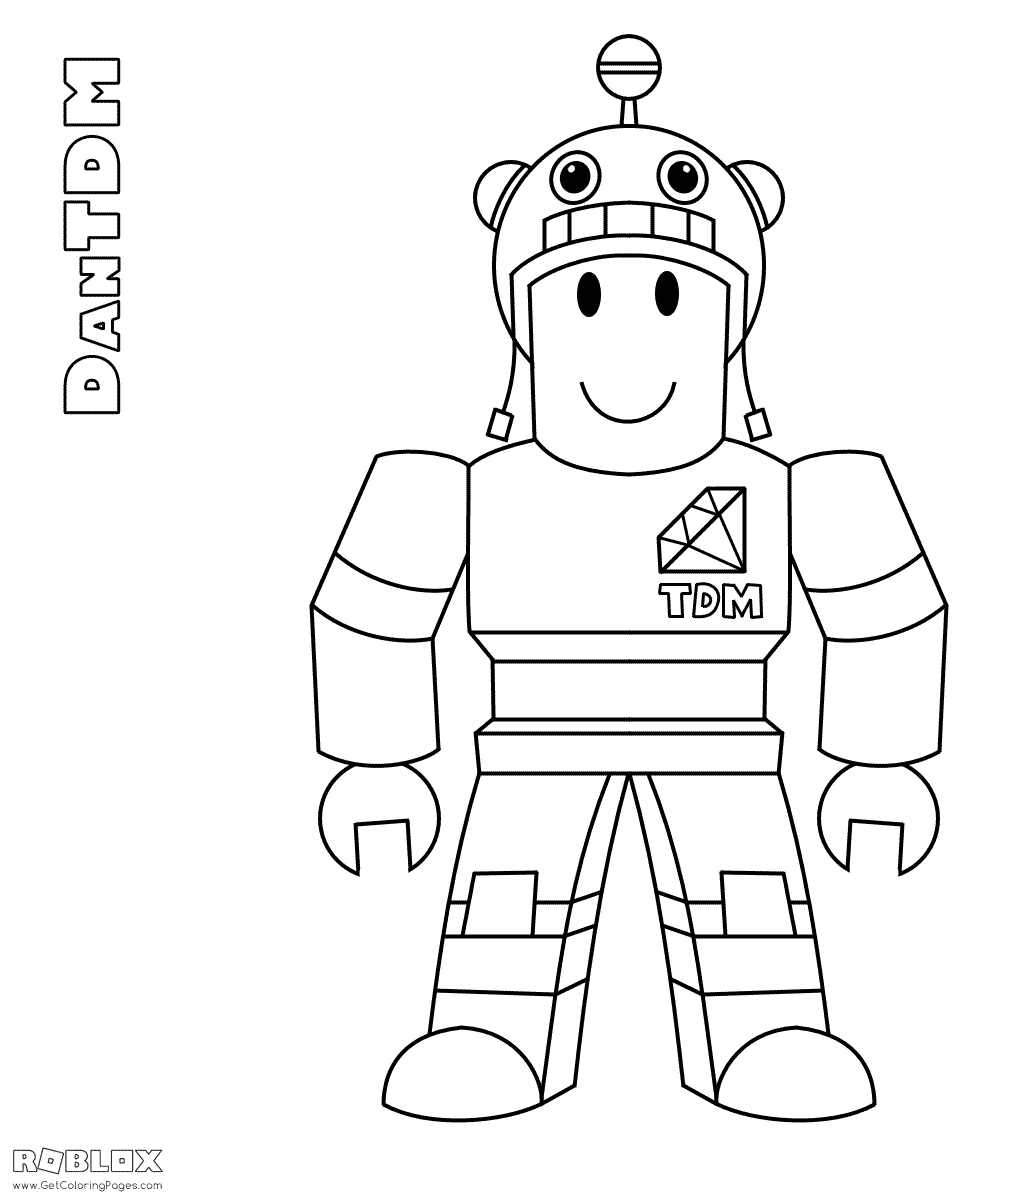 Roblox Coloring Pages - GetColoringPages.com